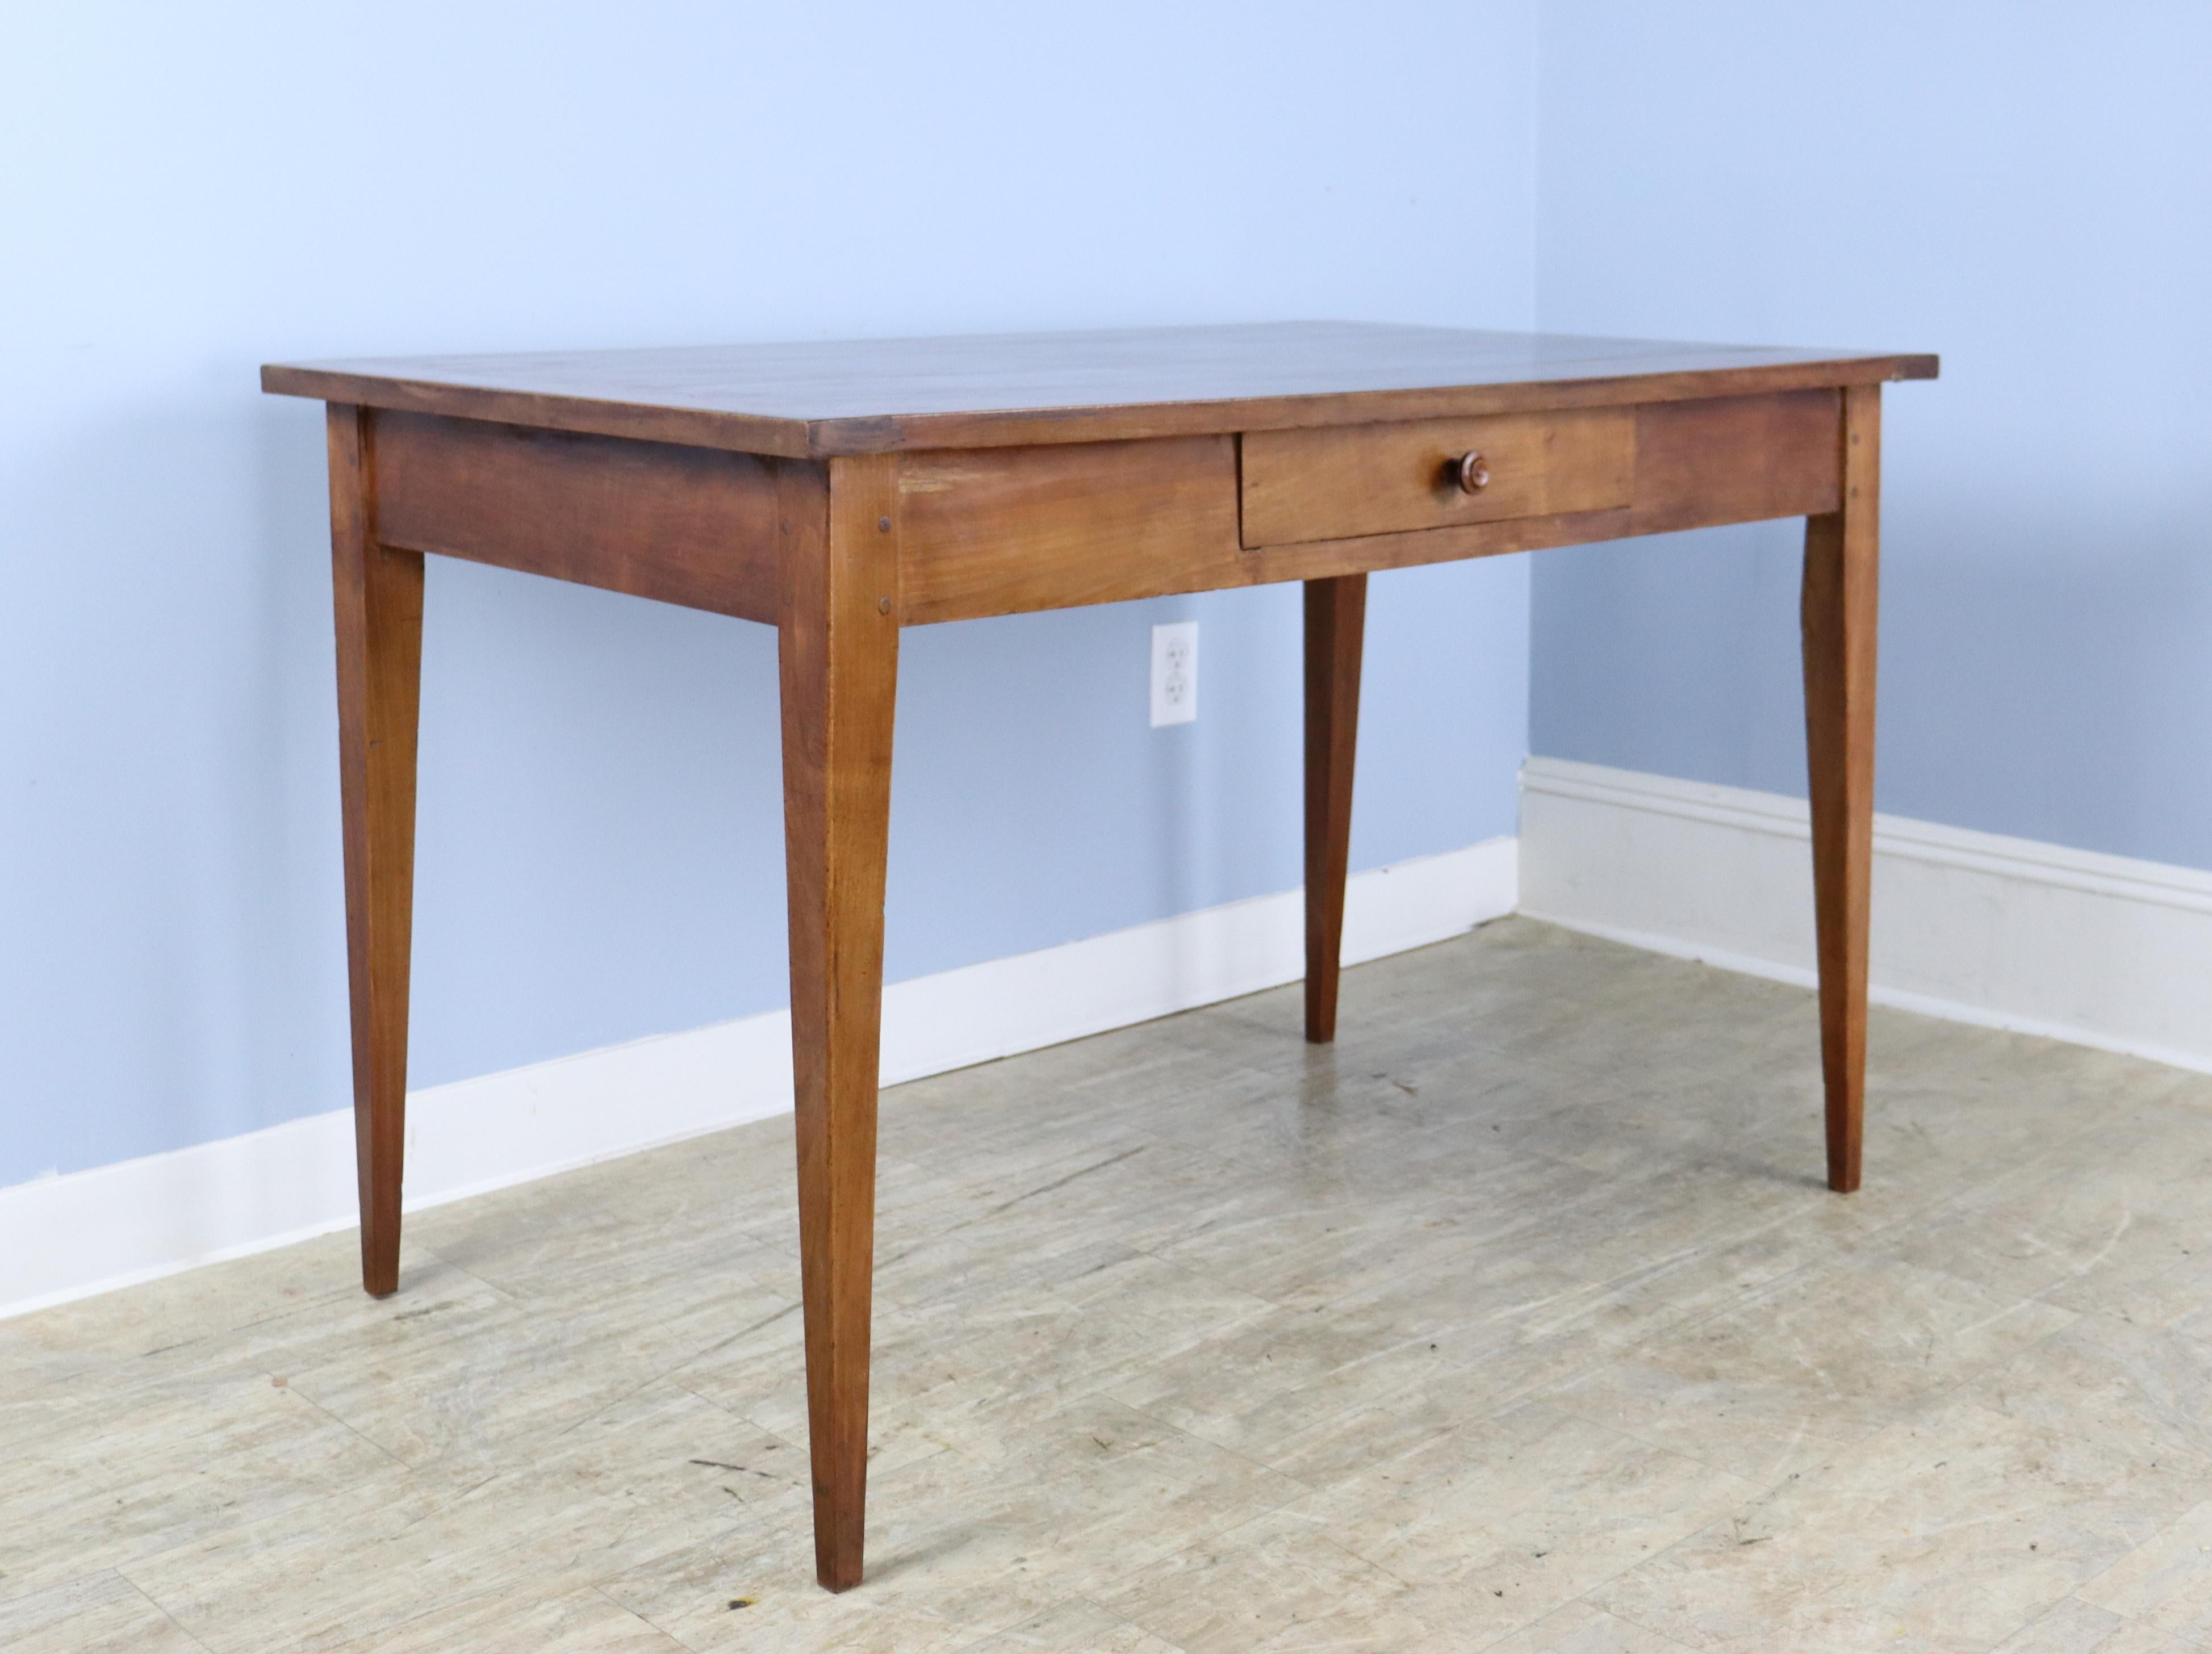 A simple, elegant and beautifully grained fruitwood writing table or desk. This piece is in very good antique condition with few flaws and a handsome presence. 25 inch apron height is just right for knees.